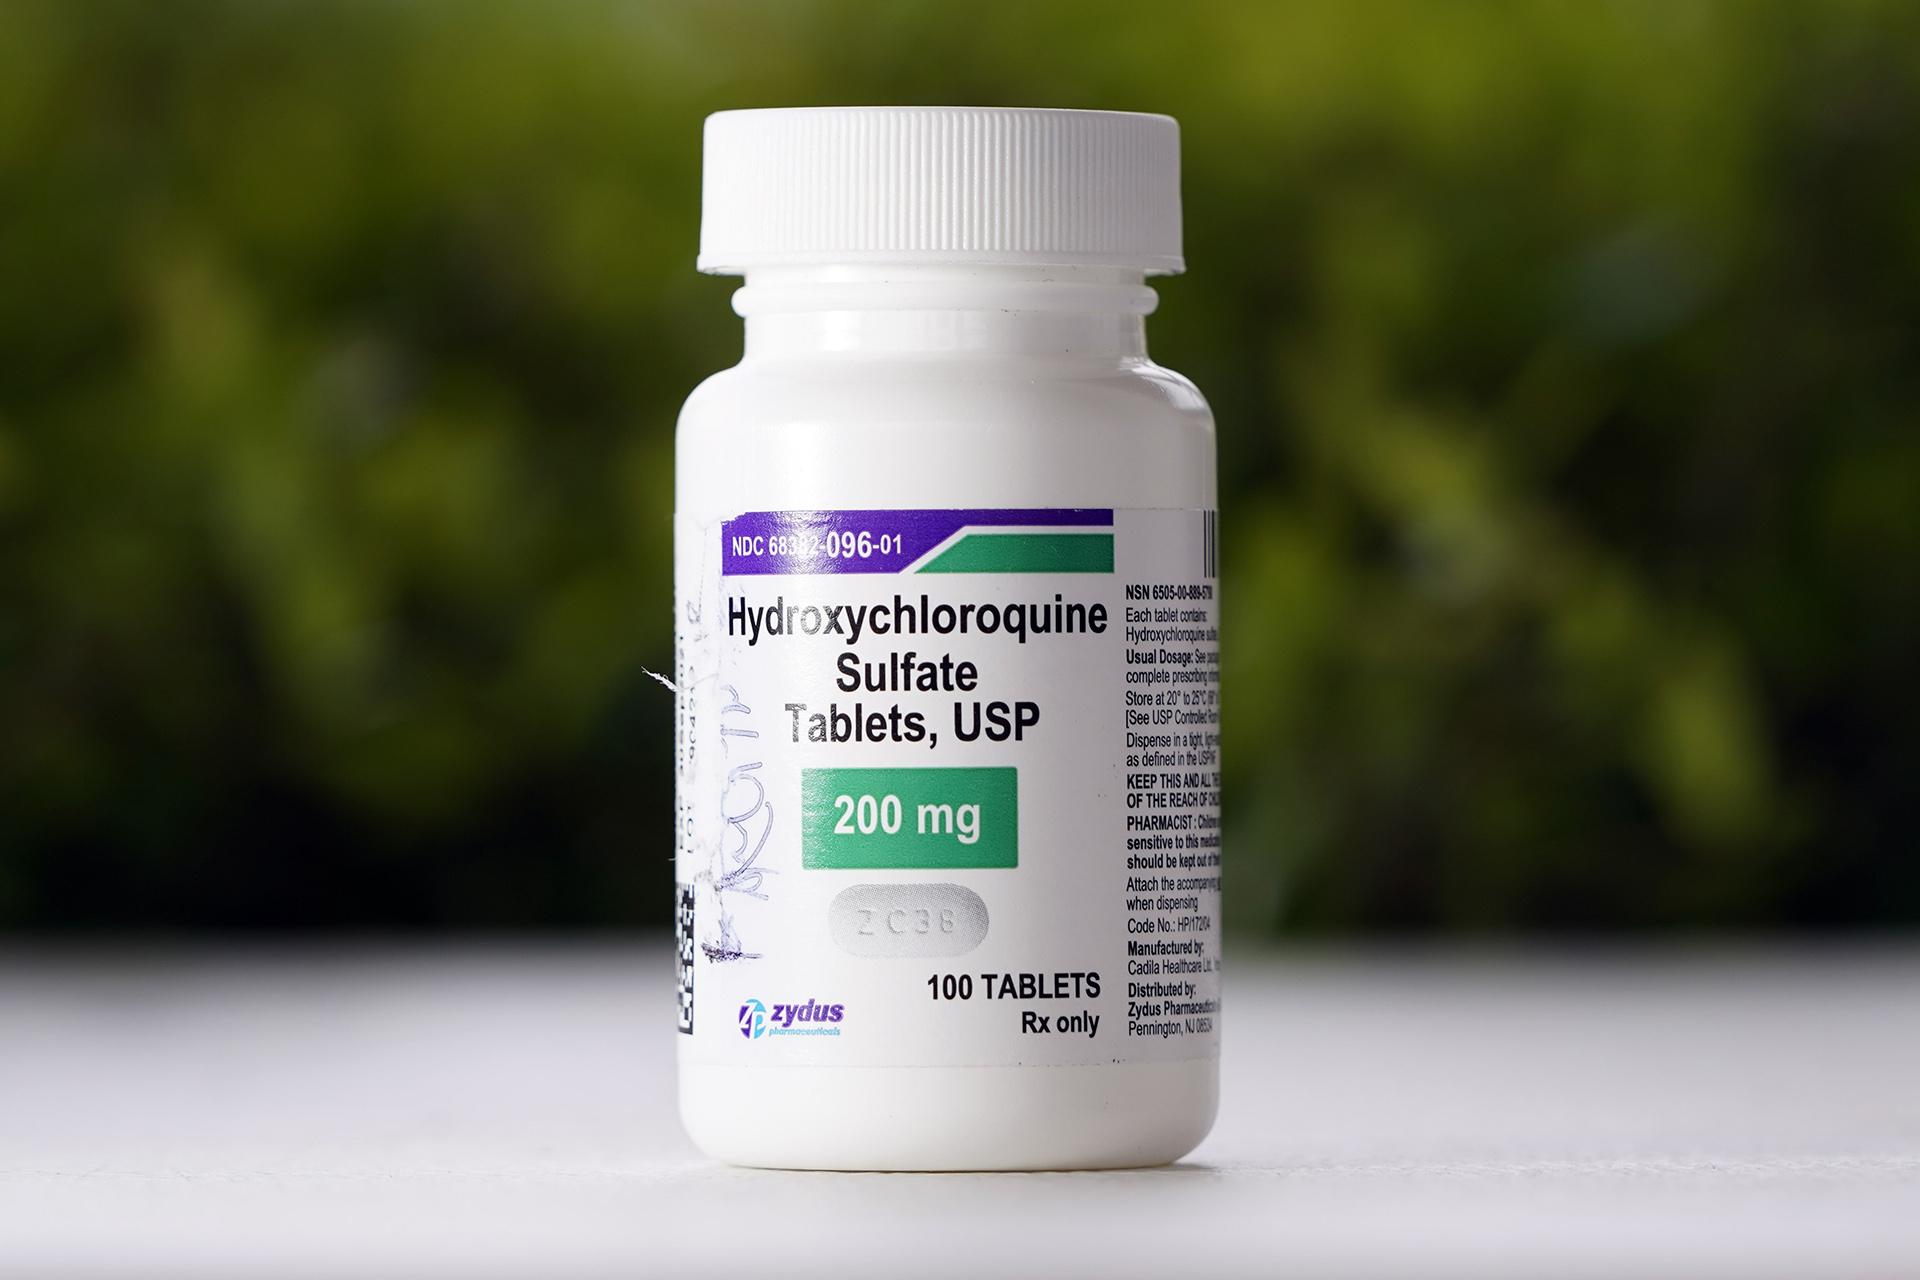 This April 7, 2020 file photo shows a bottle of hydroxychloroquine tablets in Texas City, Texas. (AP Photo / David J. Phillip, File)